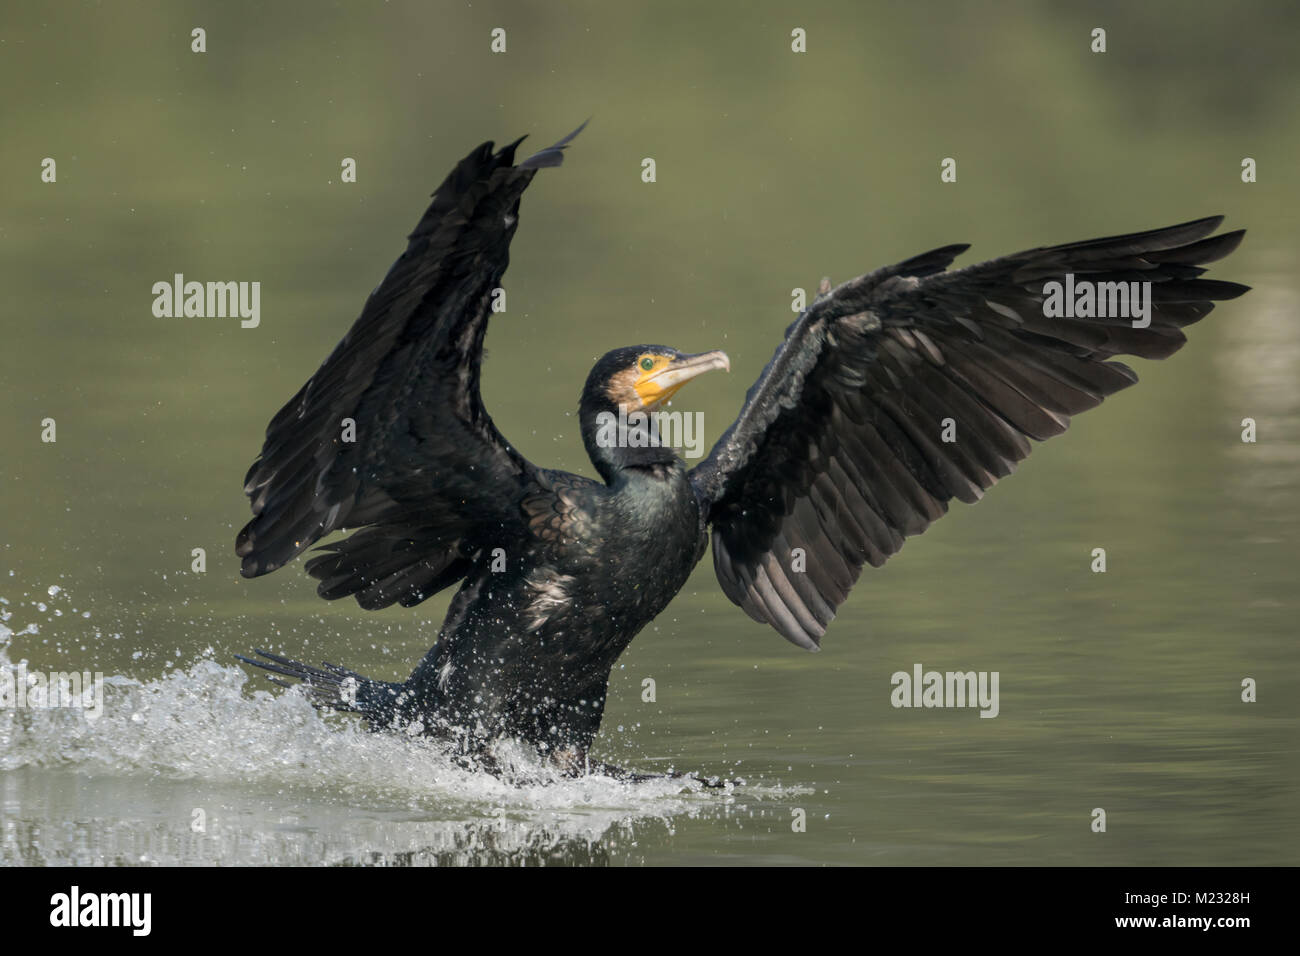 The great cormorant (Phalacrocorax carbo) landing in water at Bharatpur Bird Sanctuary in Rajasthan, India. Stock Photo